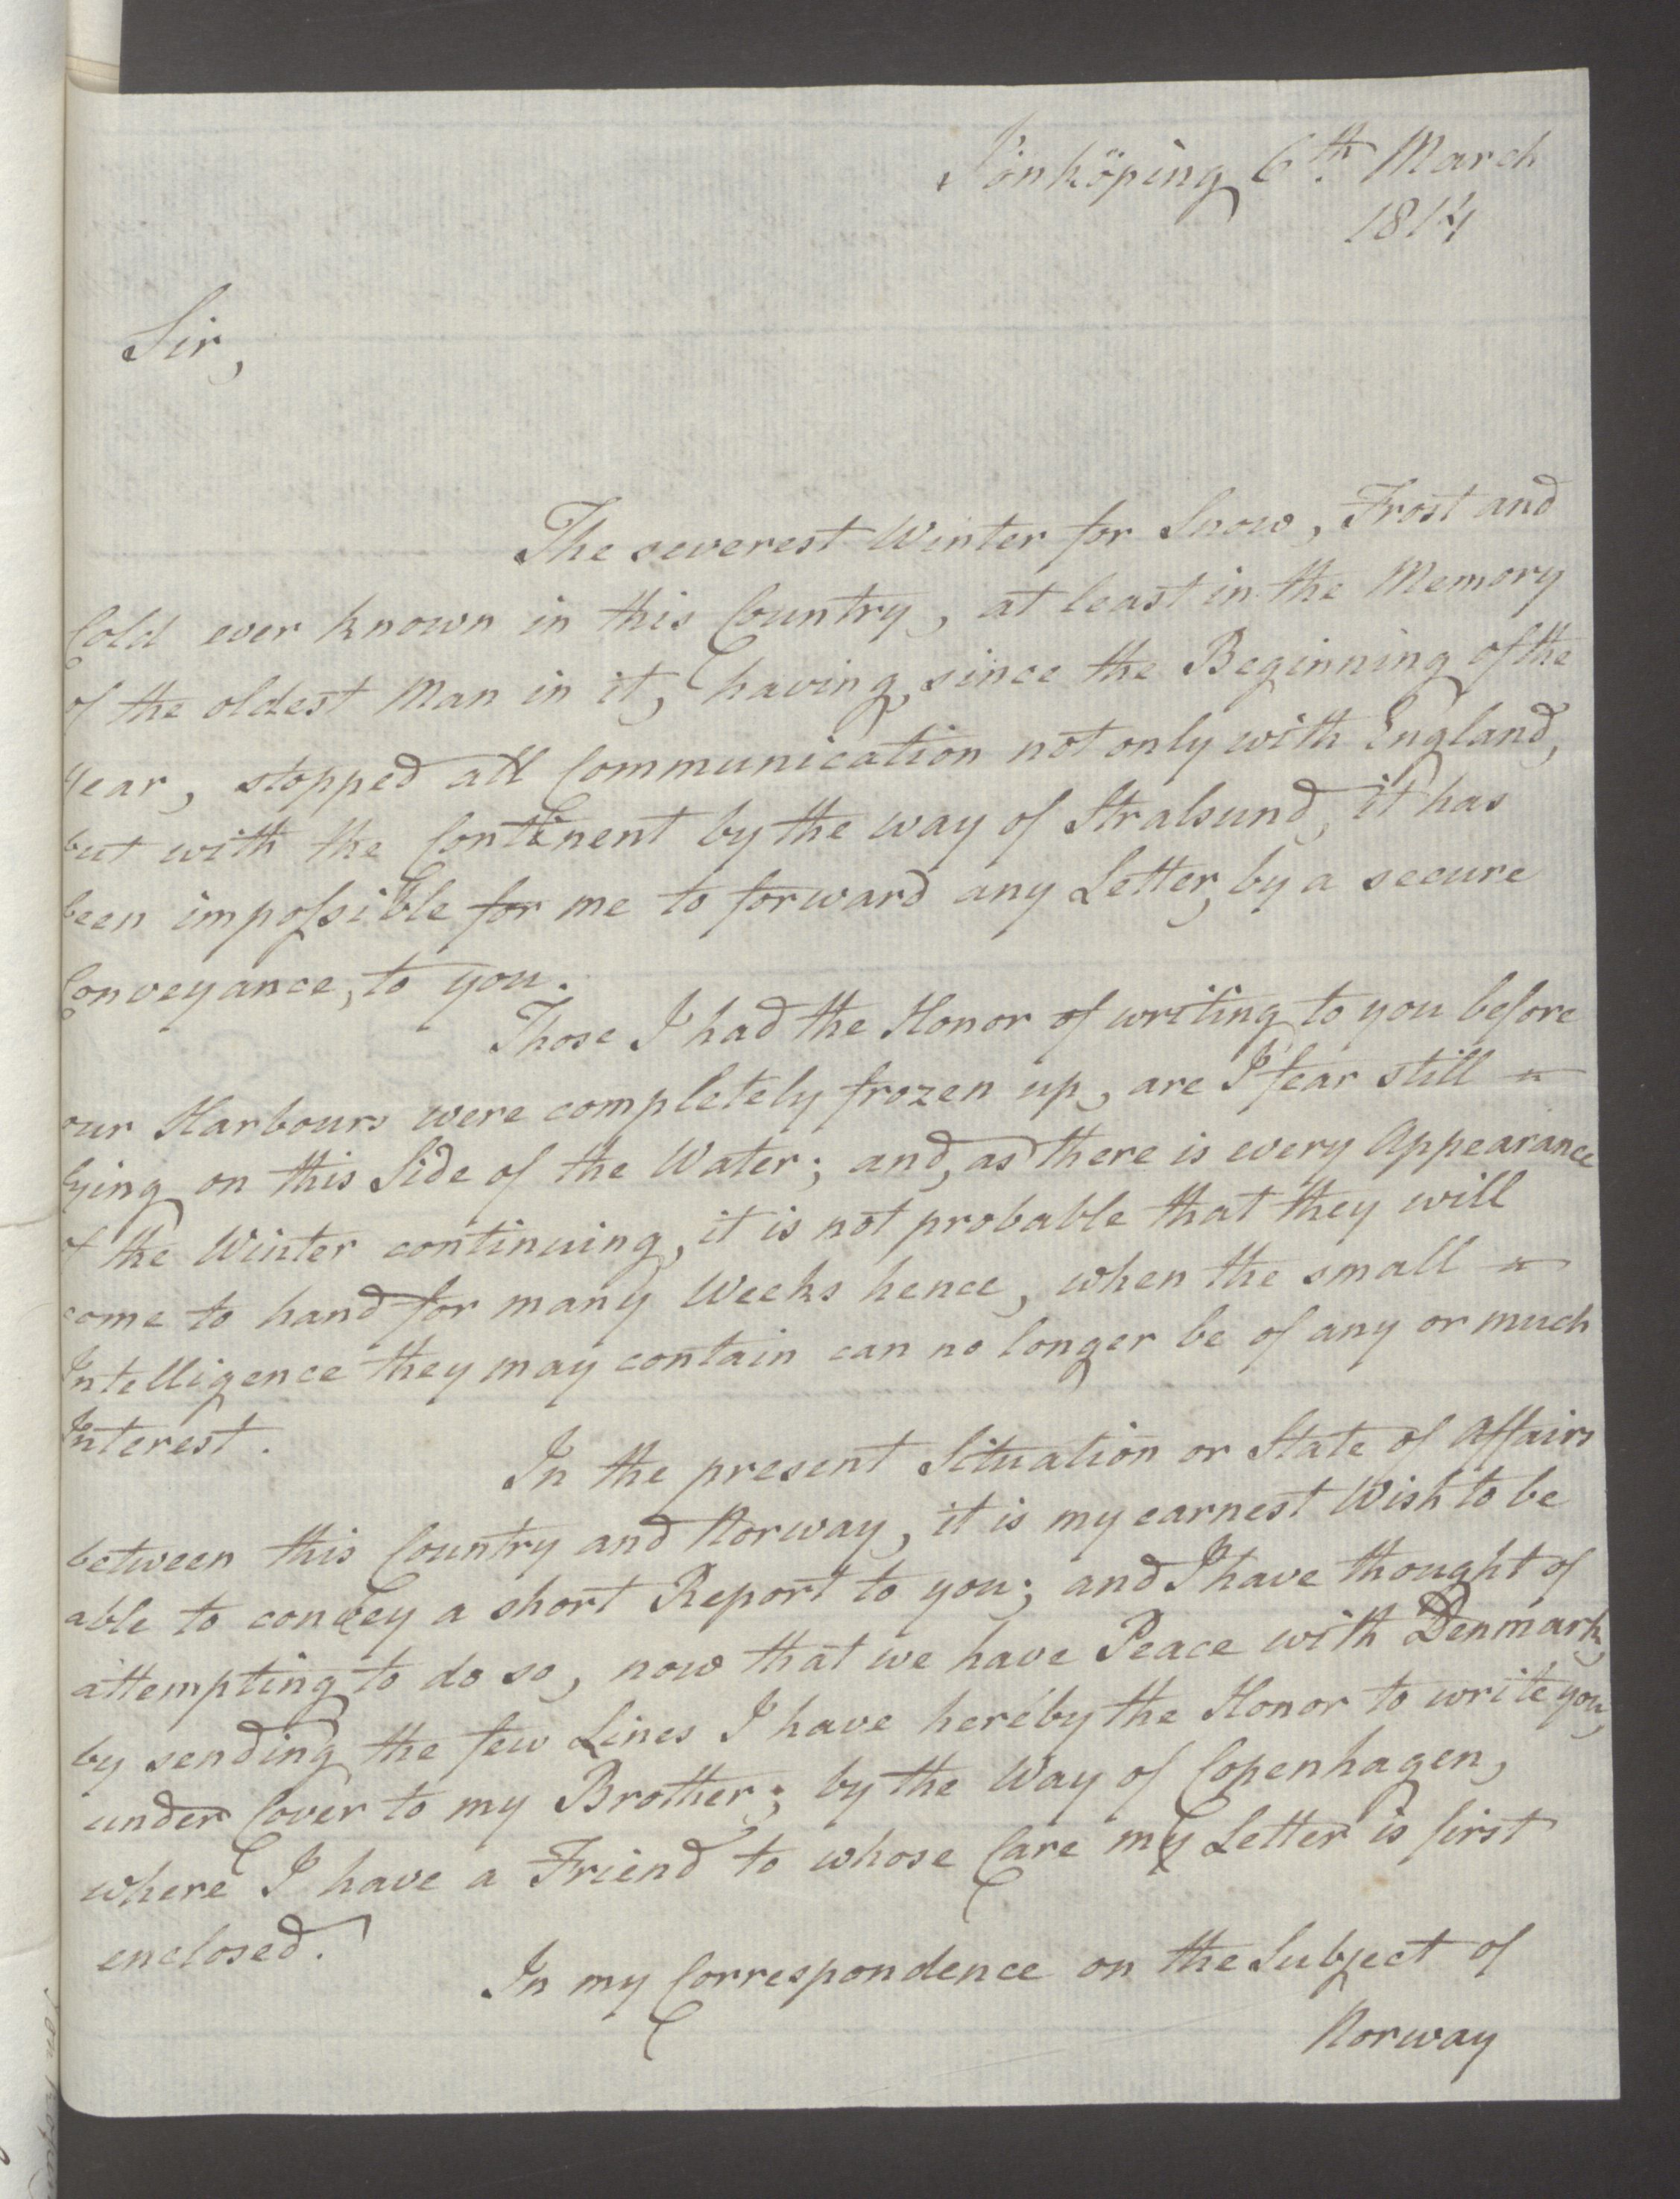 Foreign Office*, UKA/-/FO 38/16: Sir C. Gordon. Reports from Malmö, Jonkoping, and Helsingborg, 1814, p. 18